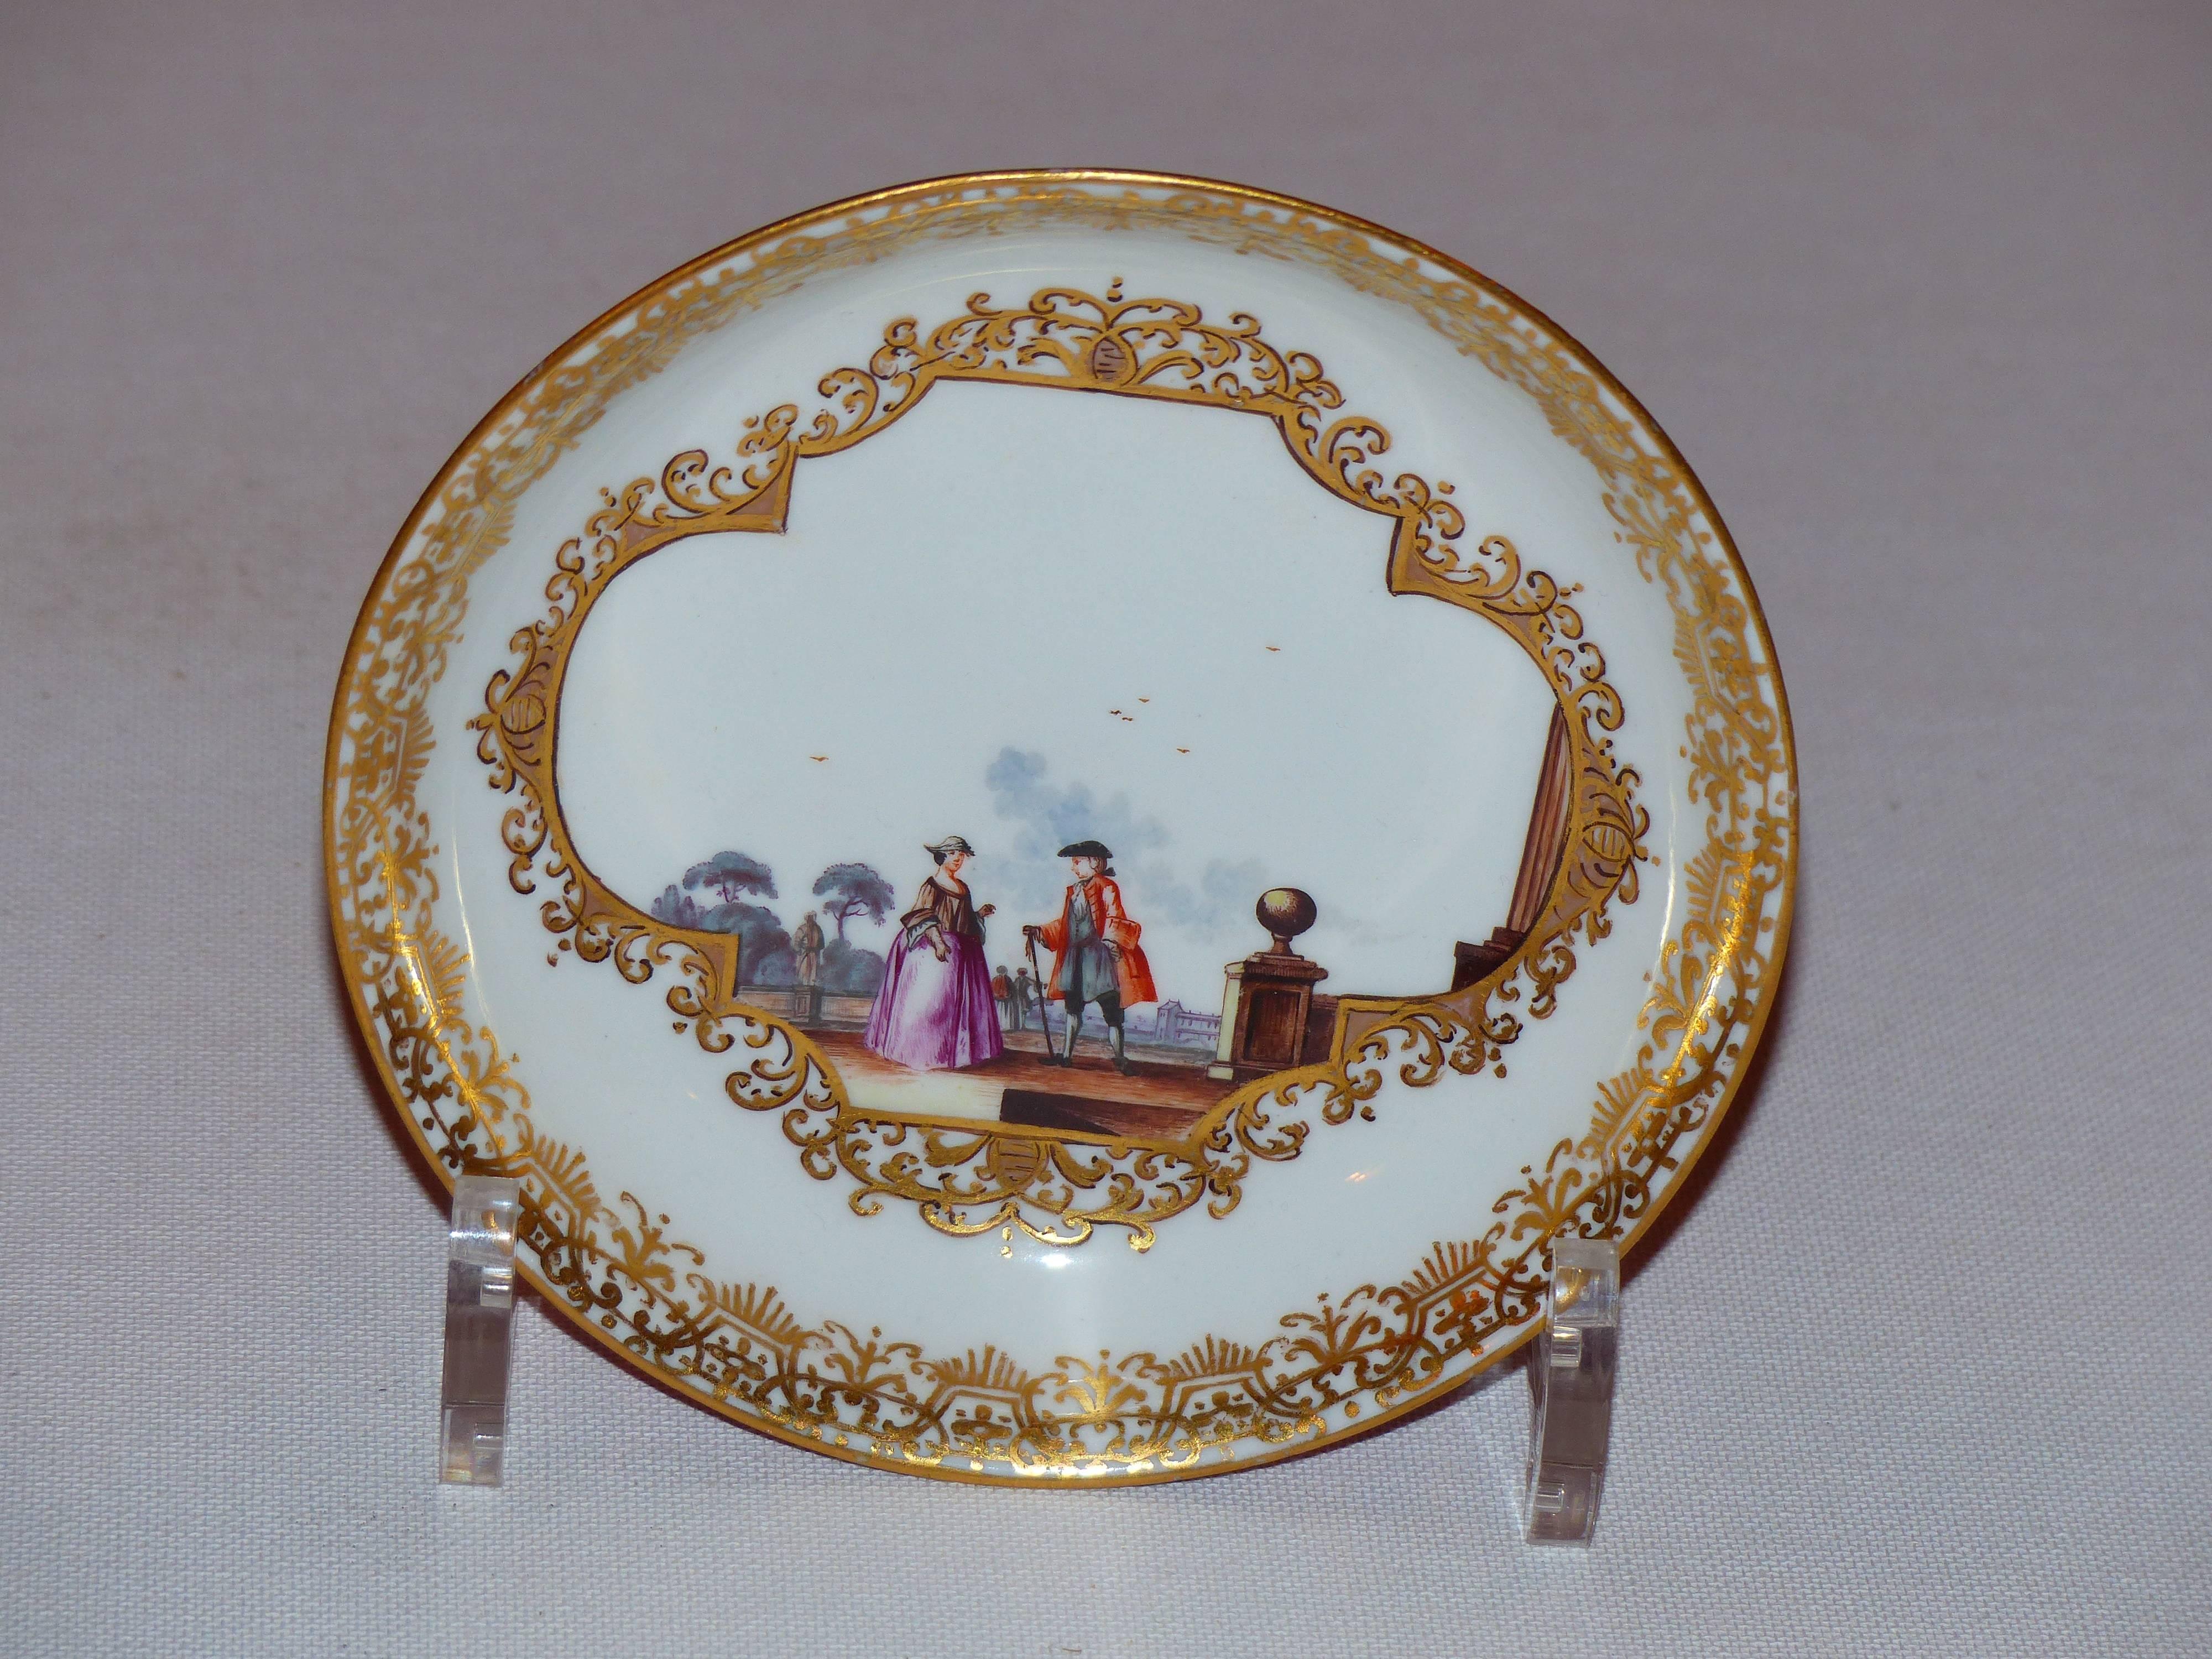 German Exclusive Antique Meissen Service by Christian F. Herold, 1735-1740, Rare For Sale